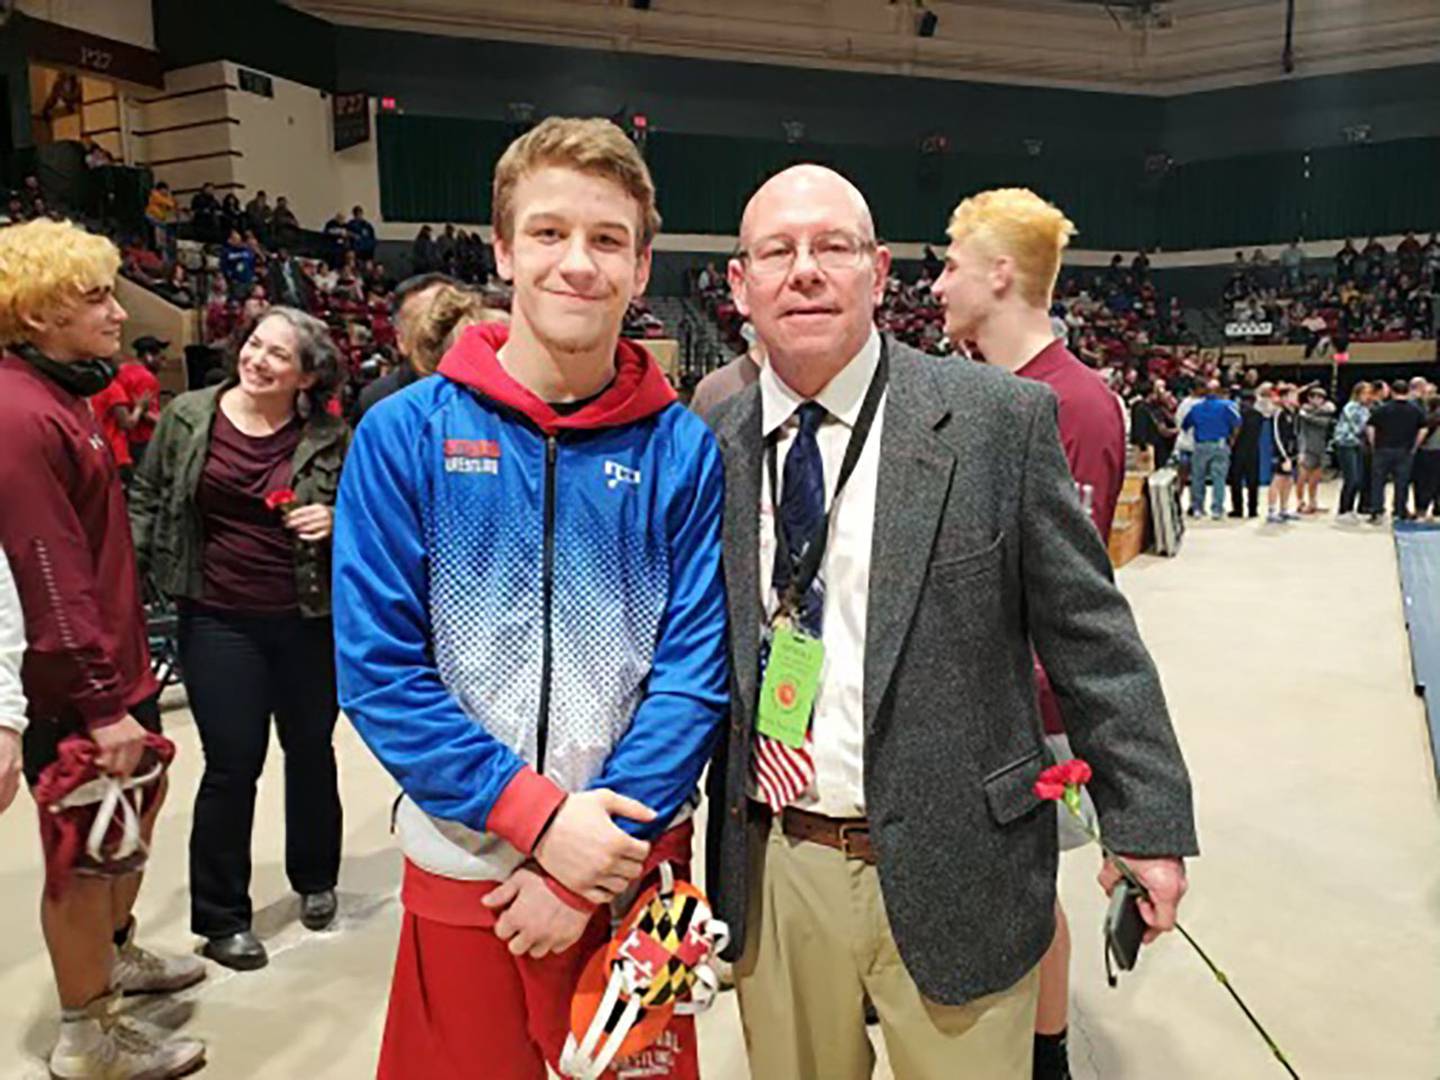 Centennial sophomore Calvin Kraisser (left) with his coach and father Cliff (right) earned his second Class 4A-3A state title at 138 pounds on Saturday at The Show Place Arena in Upper Marlboro.